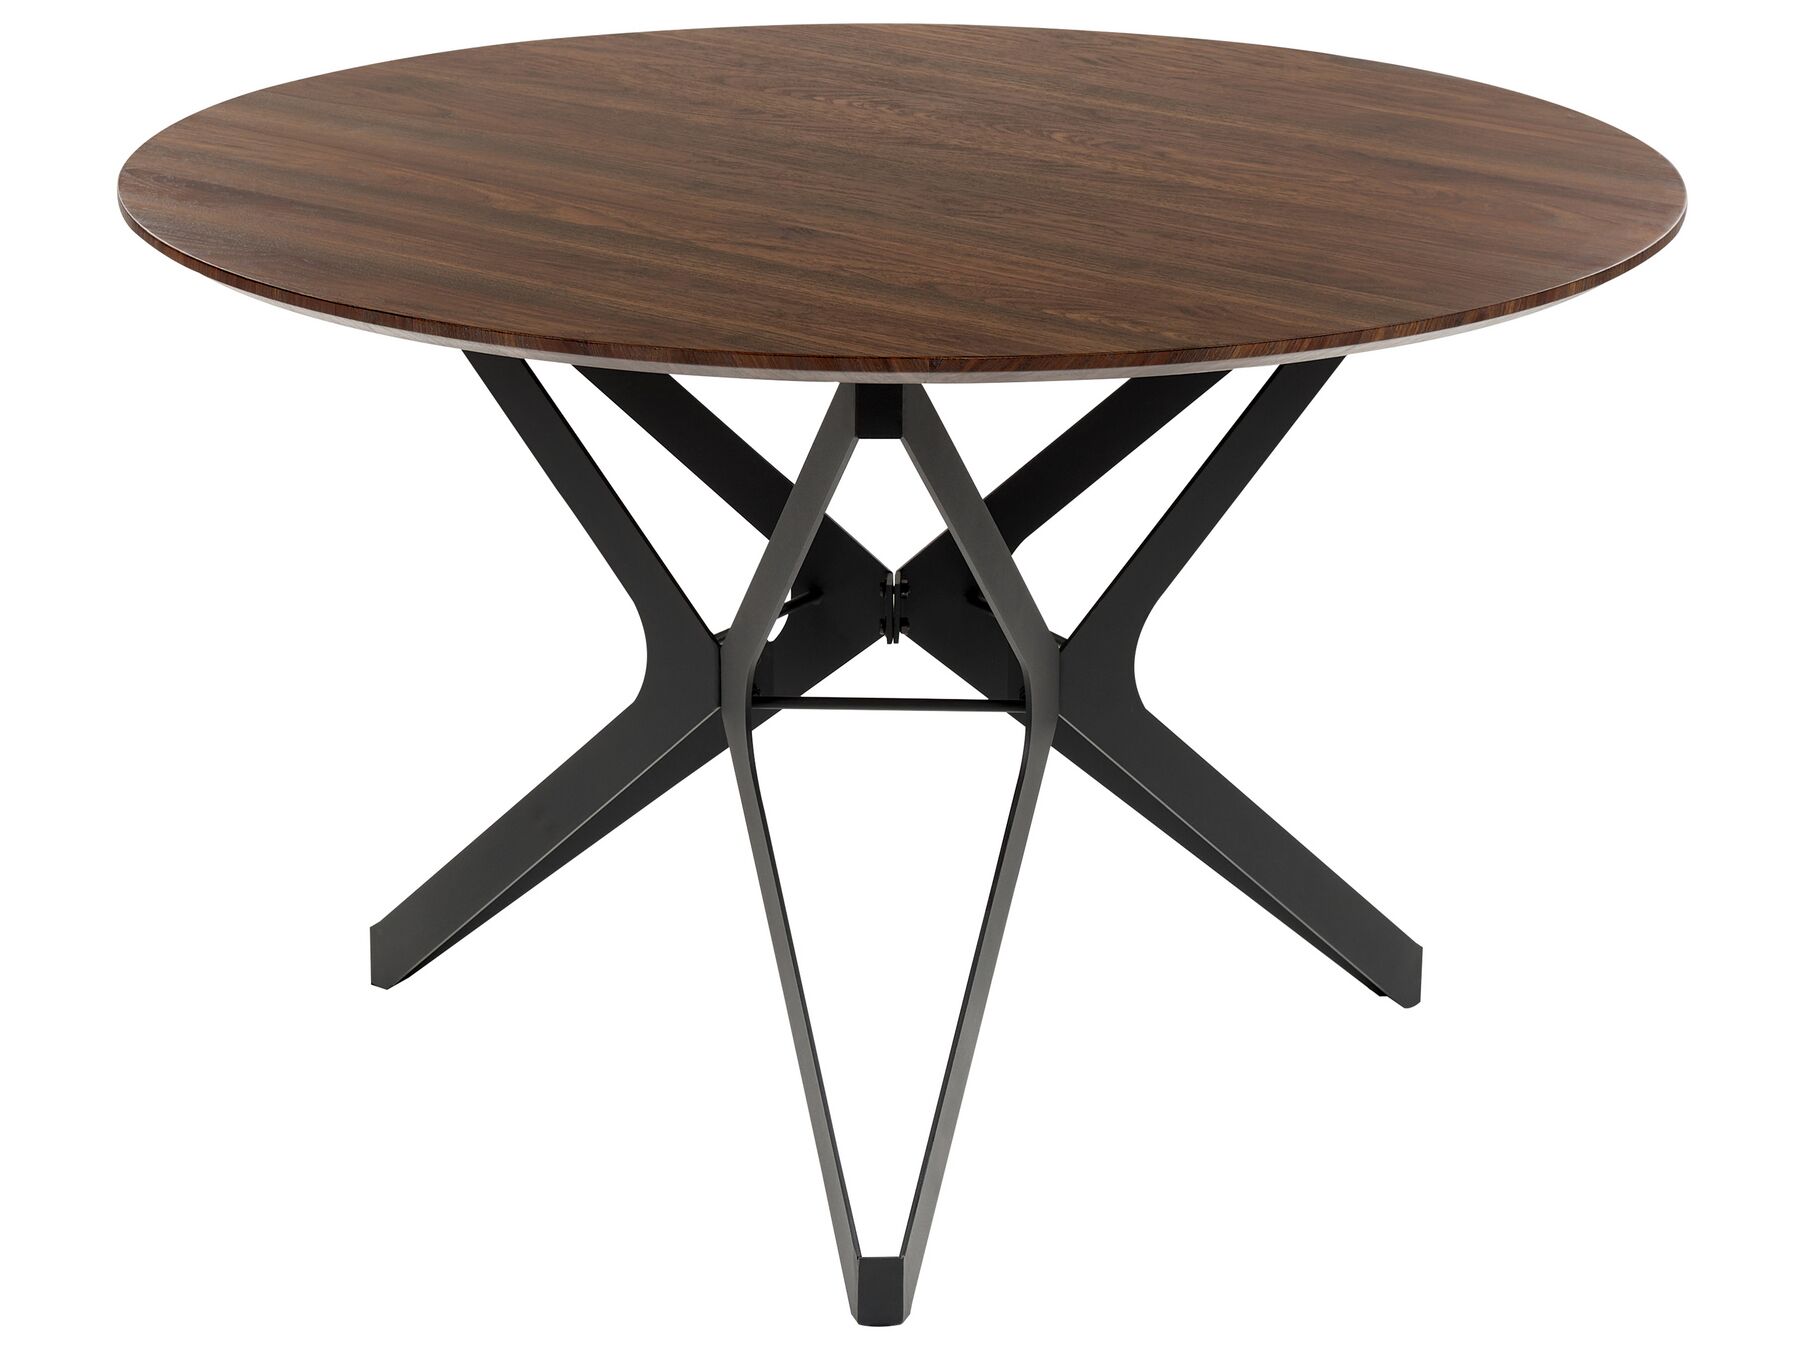 Round Dining Table ⌀ 120 cm Dark Wood and Black ALURE_859229